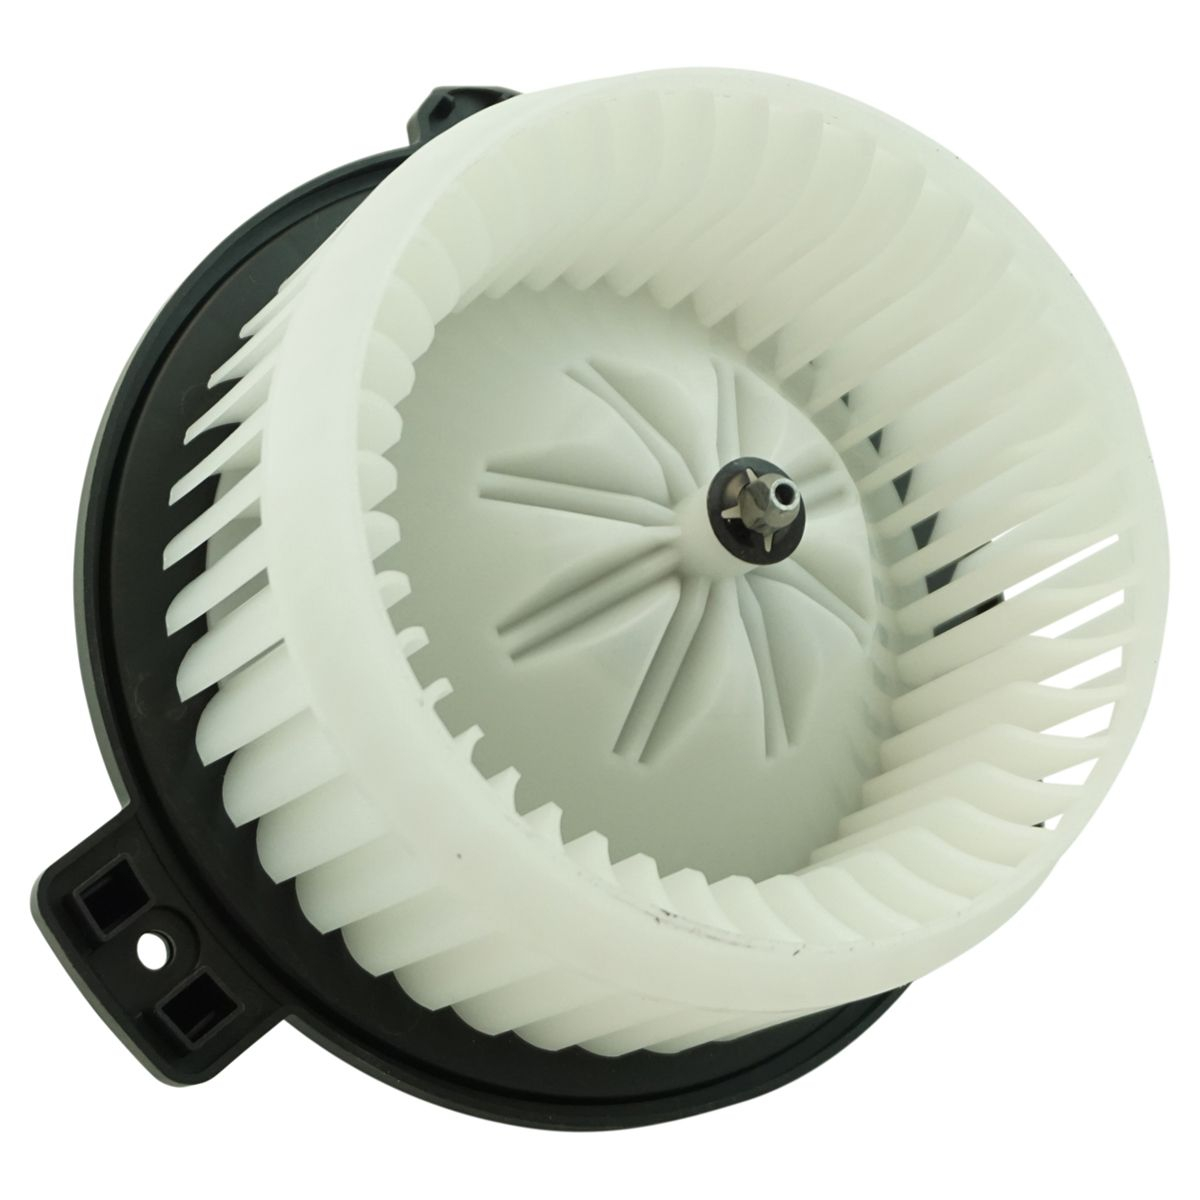 Details About Air Conditioning Heater Heat Blower Motor W Fan Cage For Chevy Spark New within sizing 1200 X 1200